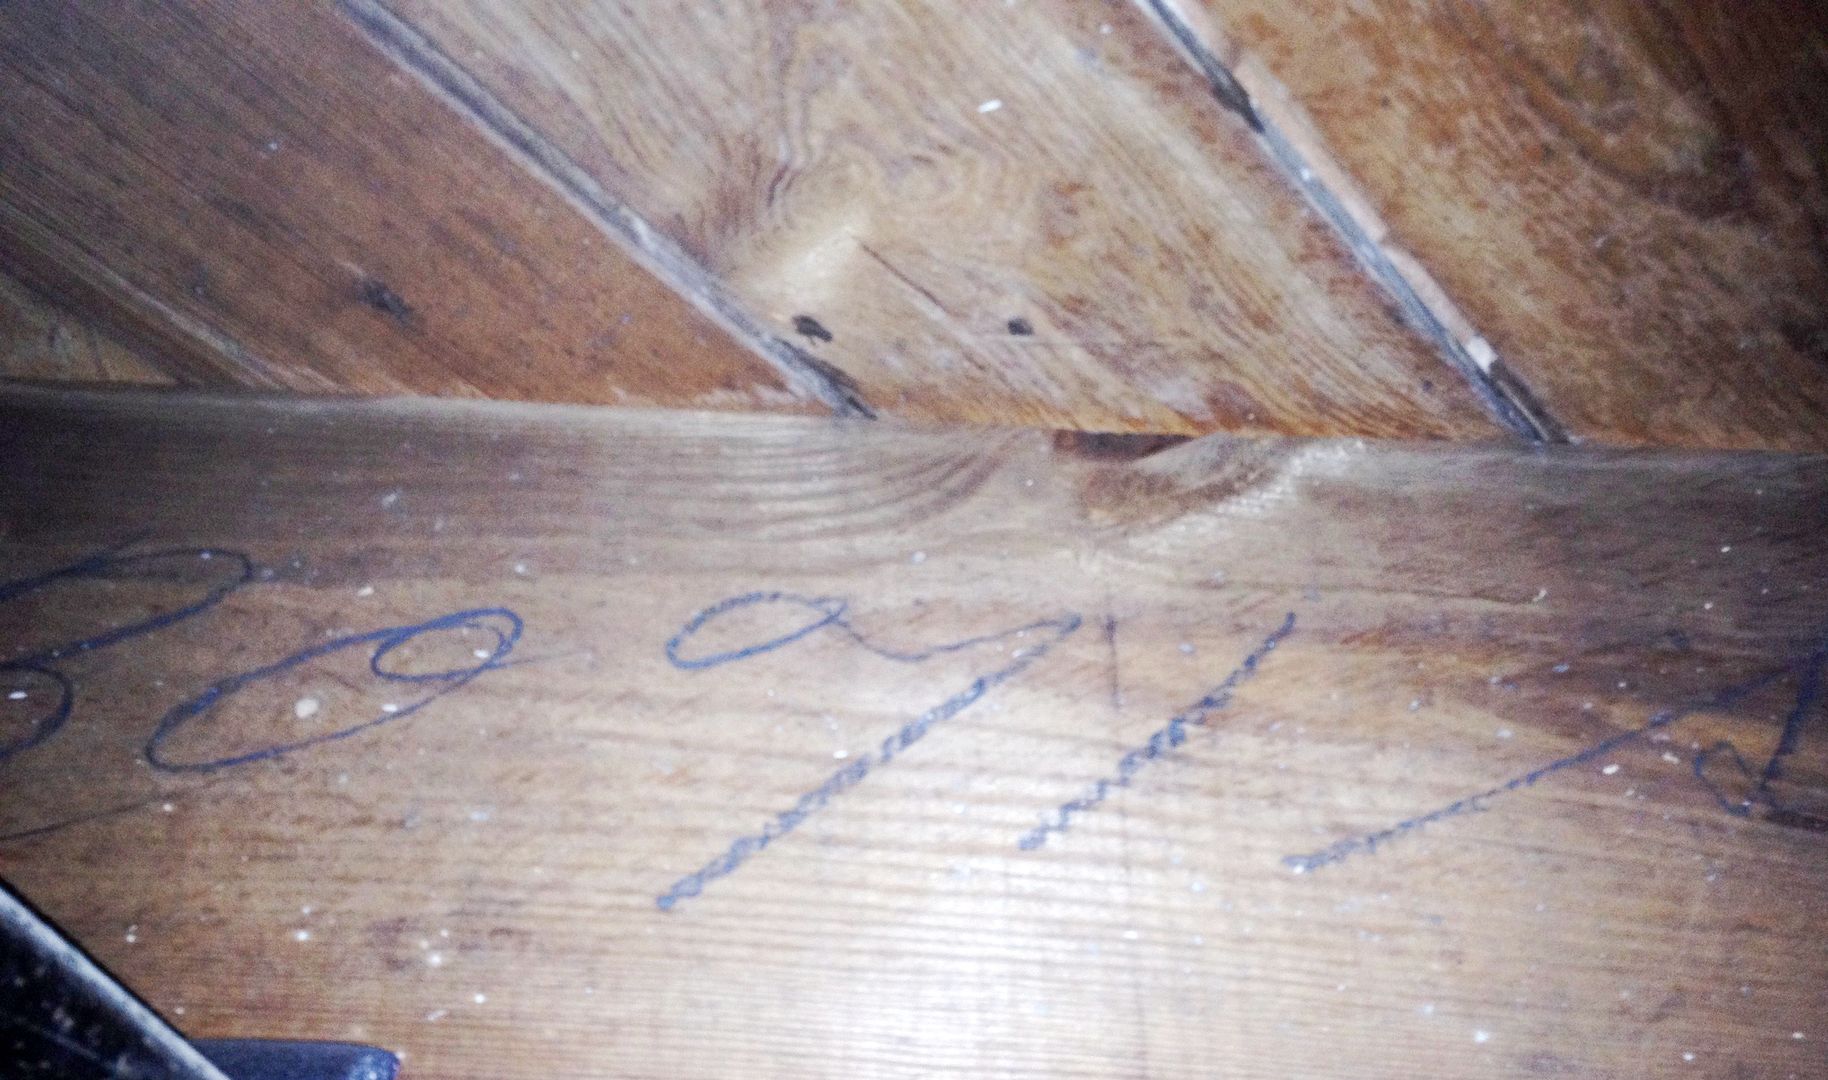 And in the basement, Catarina found the model number written on the floor joists!